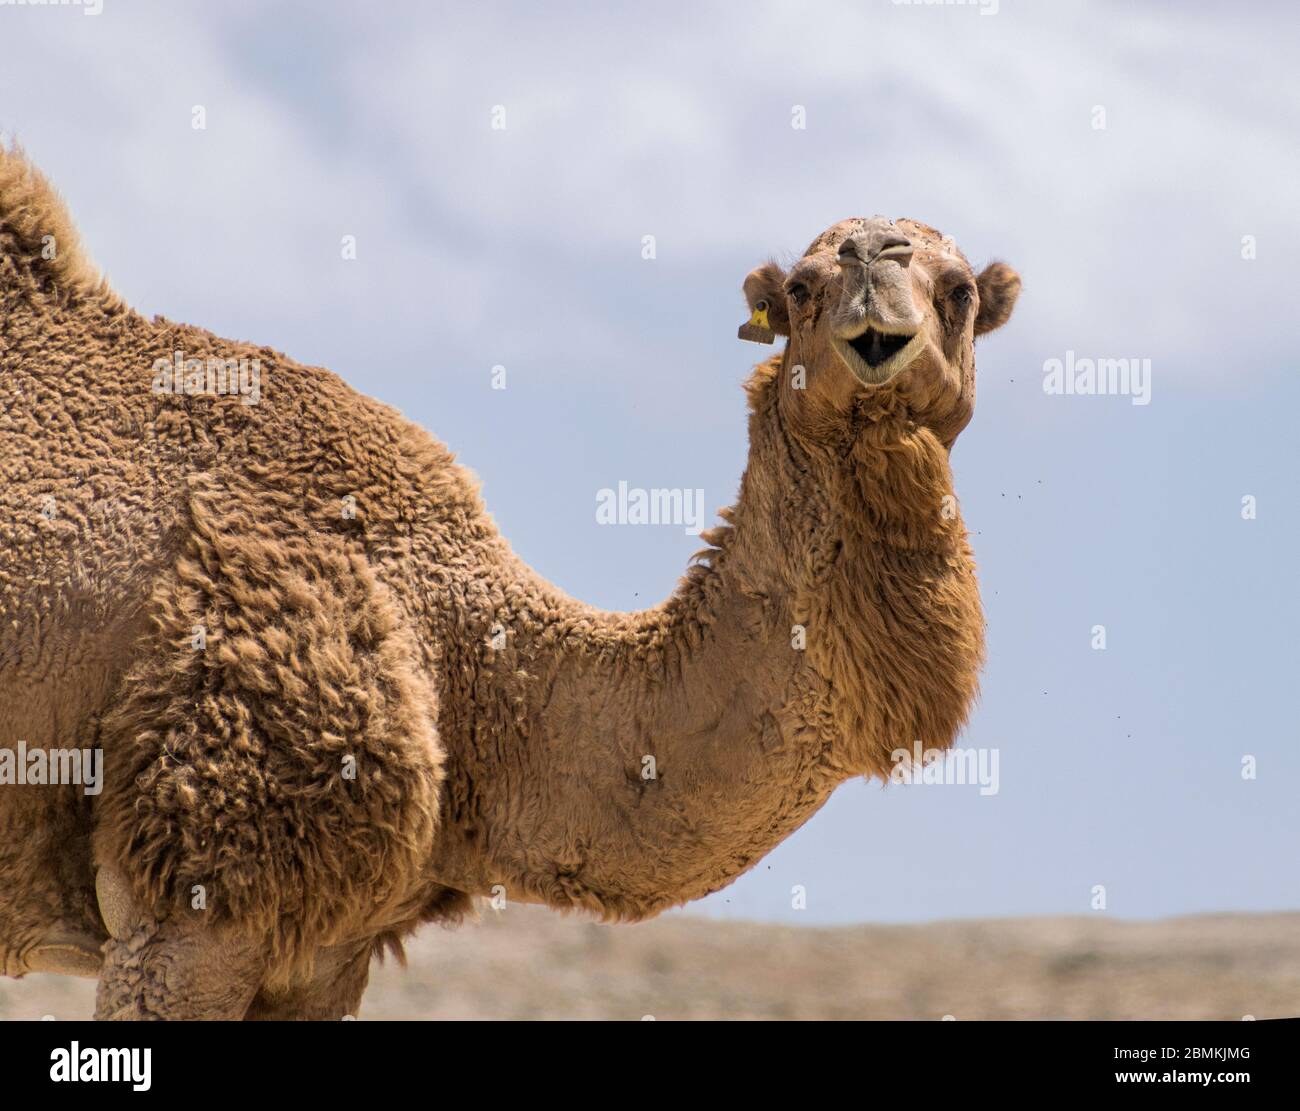 head and shoulders portrait of a genuine negev bedouin camel in a village near mitspe ramon in israel with a blurry cloudy desert background Stock Photo